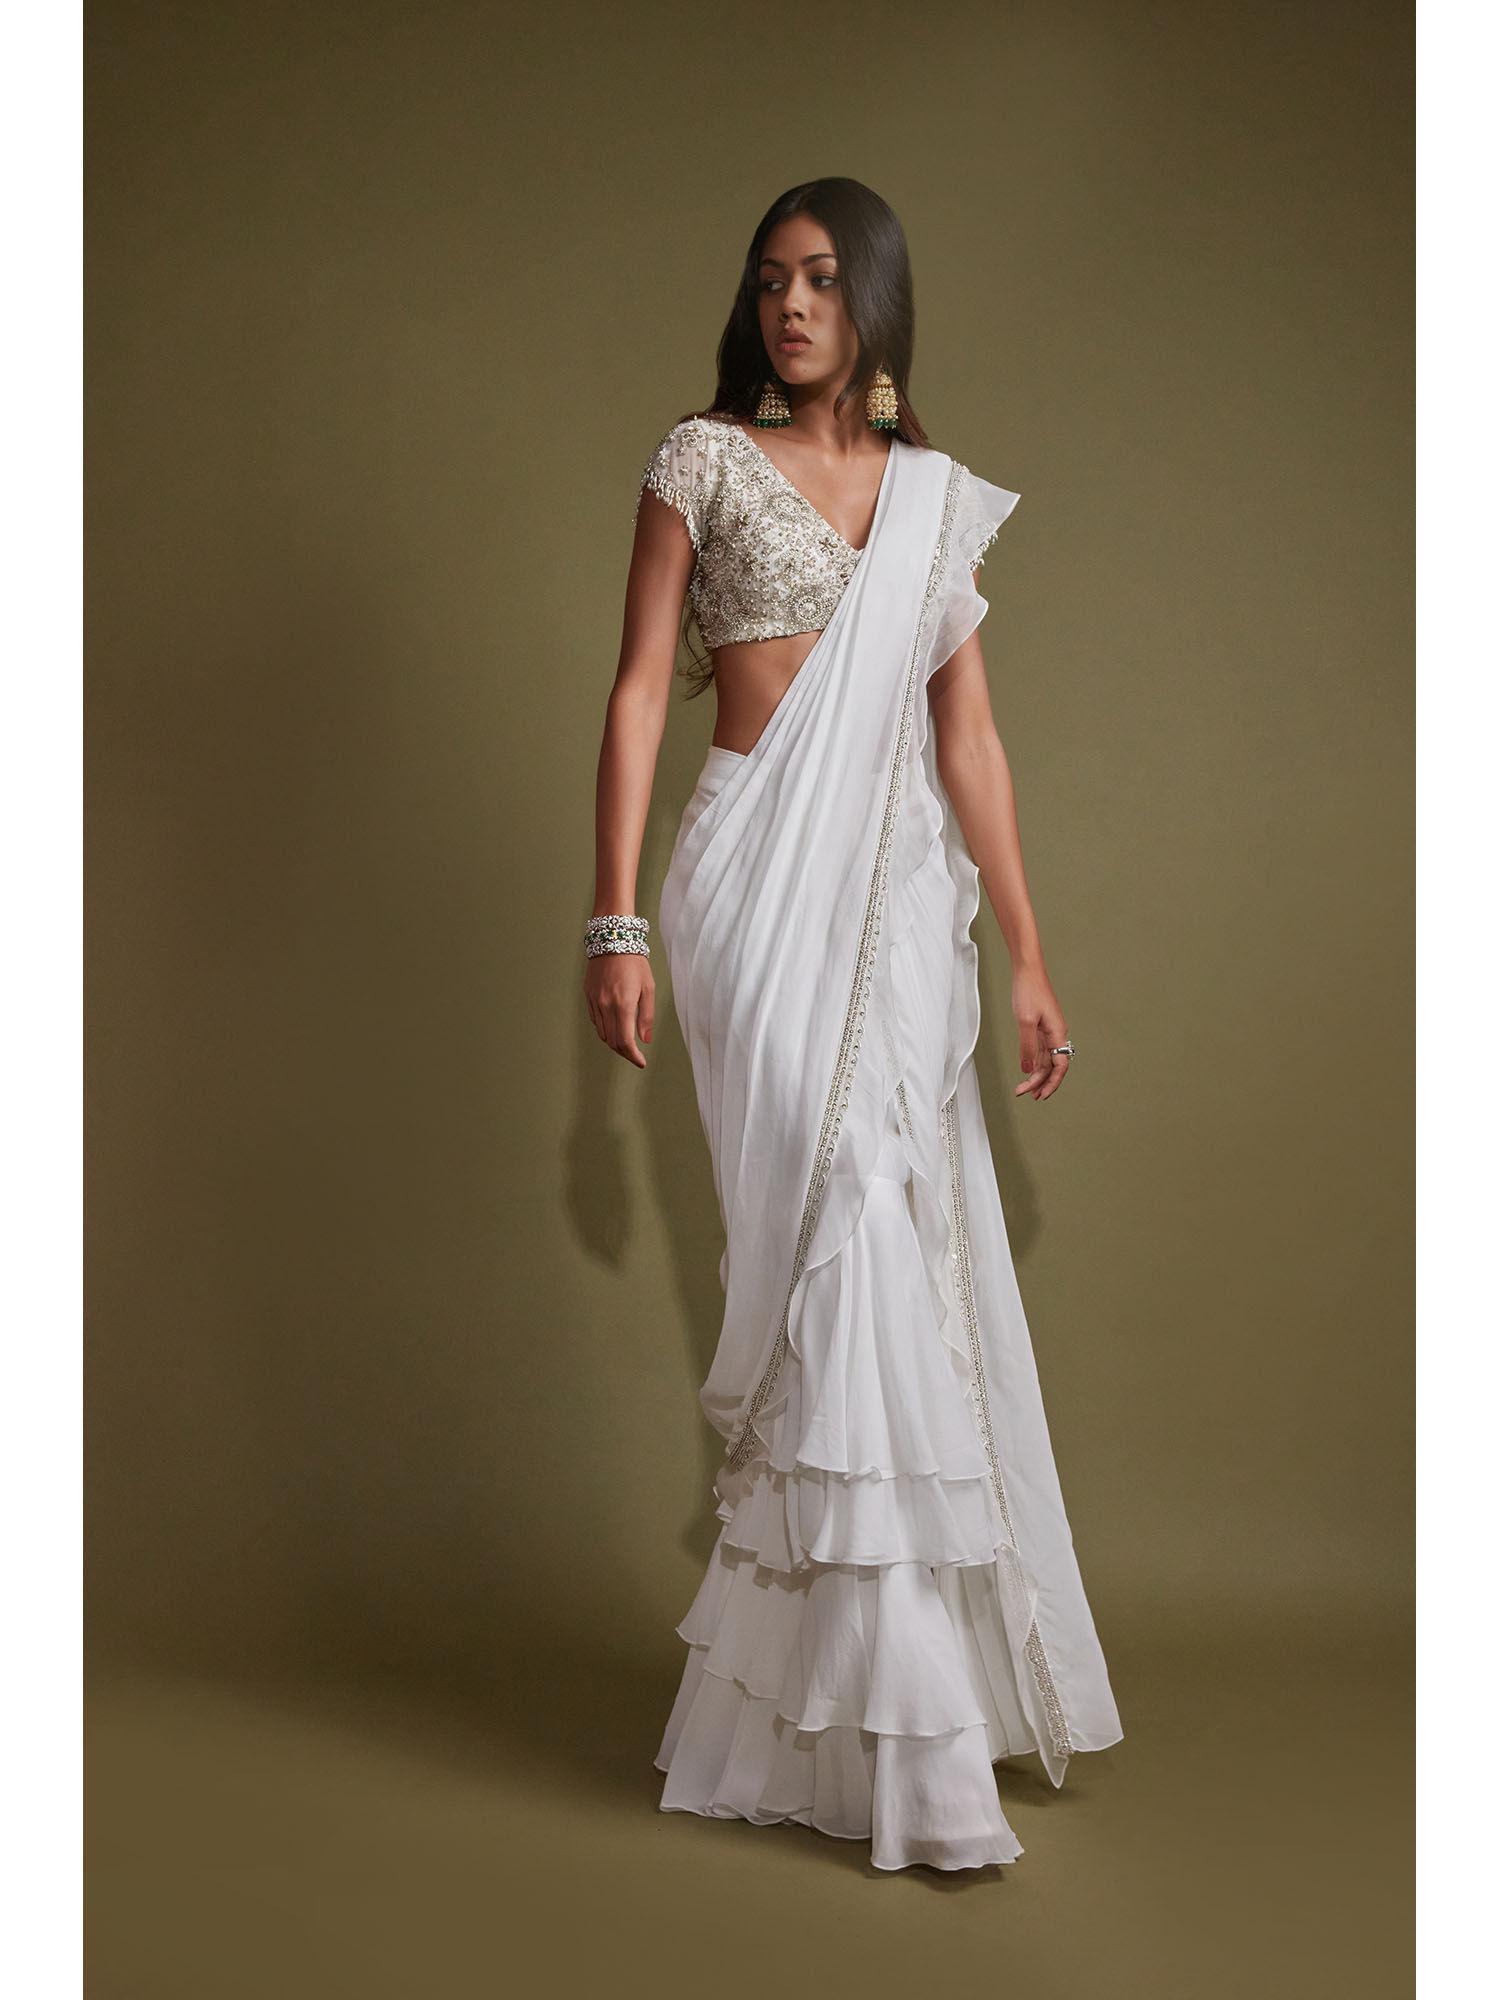 white layered saree with cap sleeve blouse with stitched